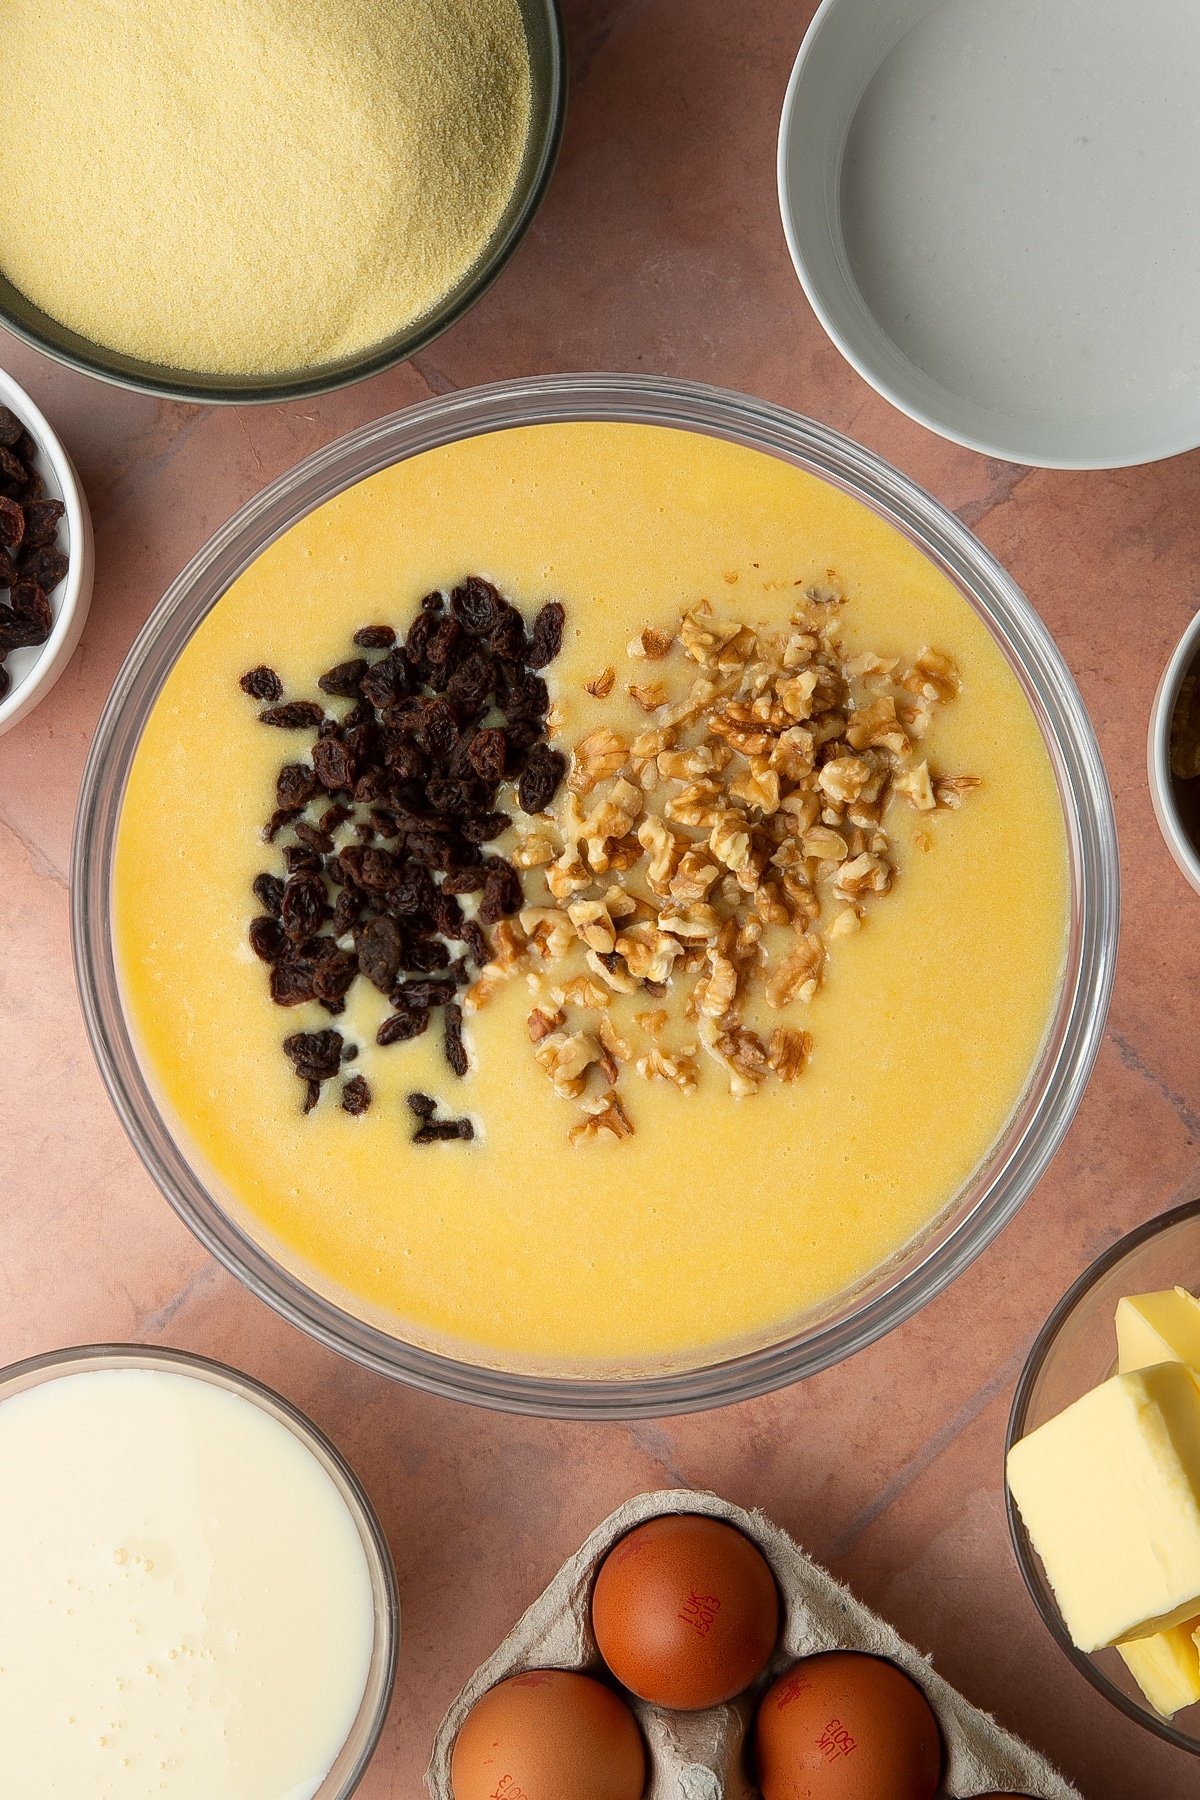 Golden semolina cake batter in a bowl with raisins and walnuts on top. Ingredients to make sanwin-makin surround the bowl.